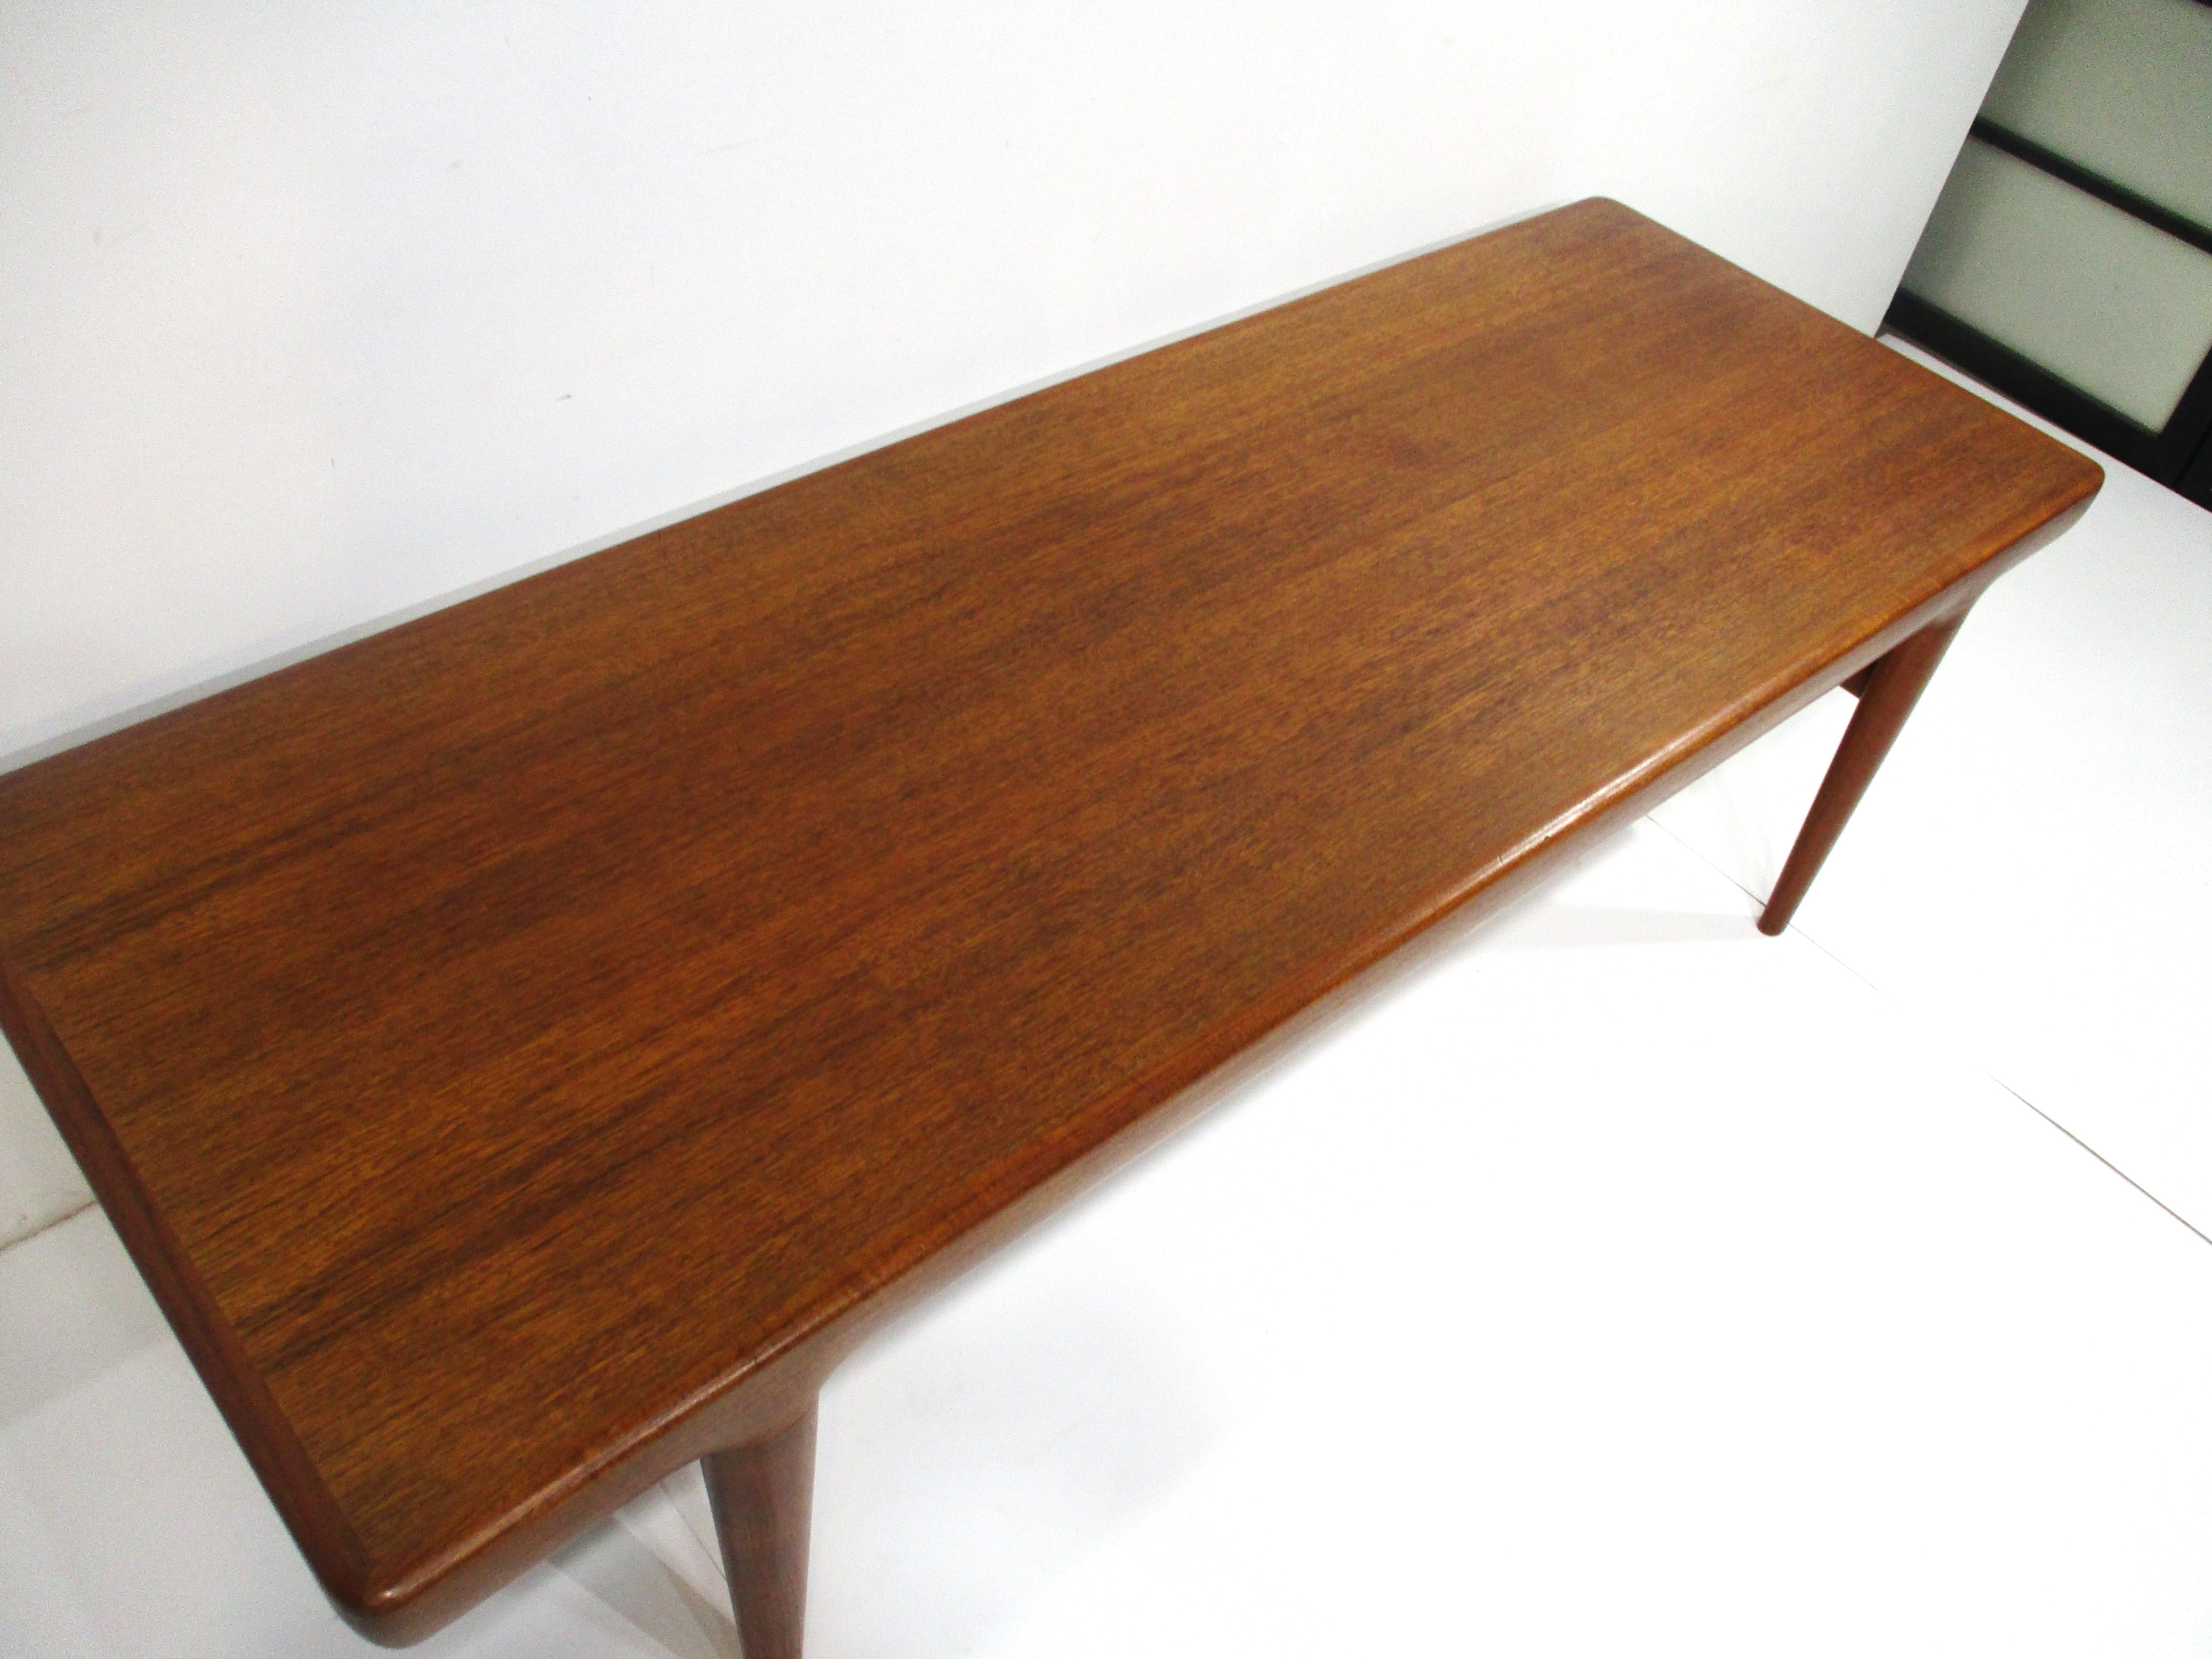 Teak Coffee Table w/ Pull Out Ends by Silkeborg -Johannes Andersen Denmark  5